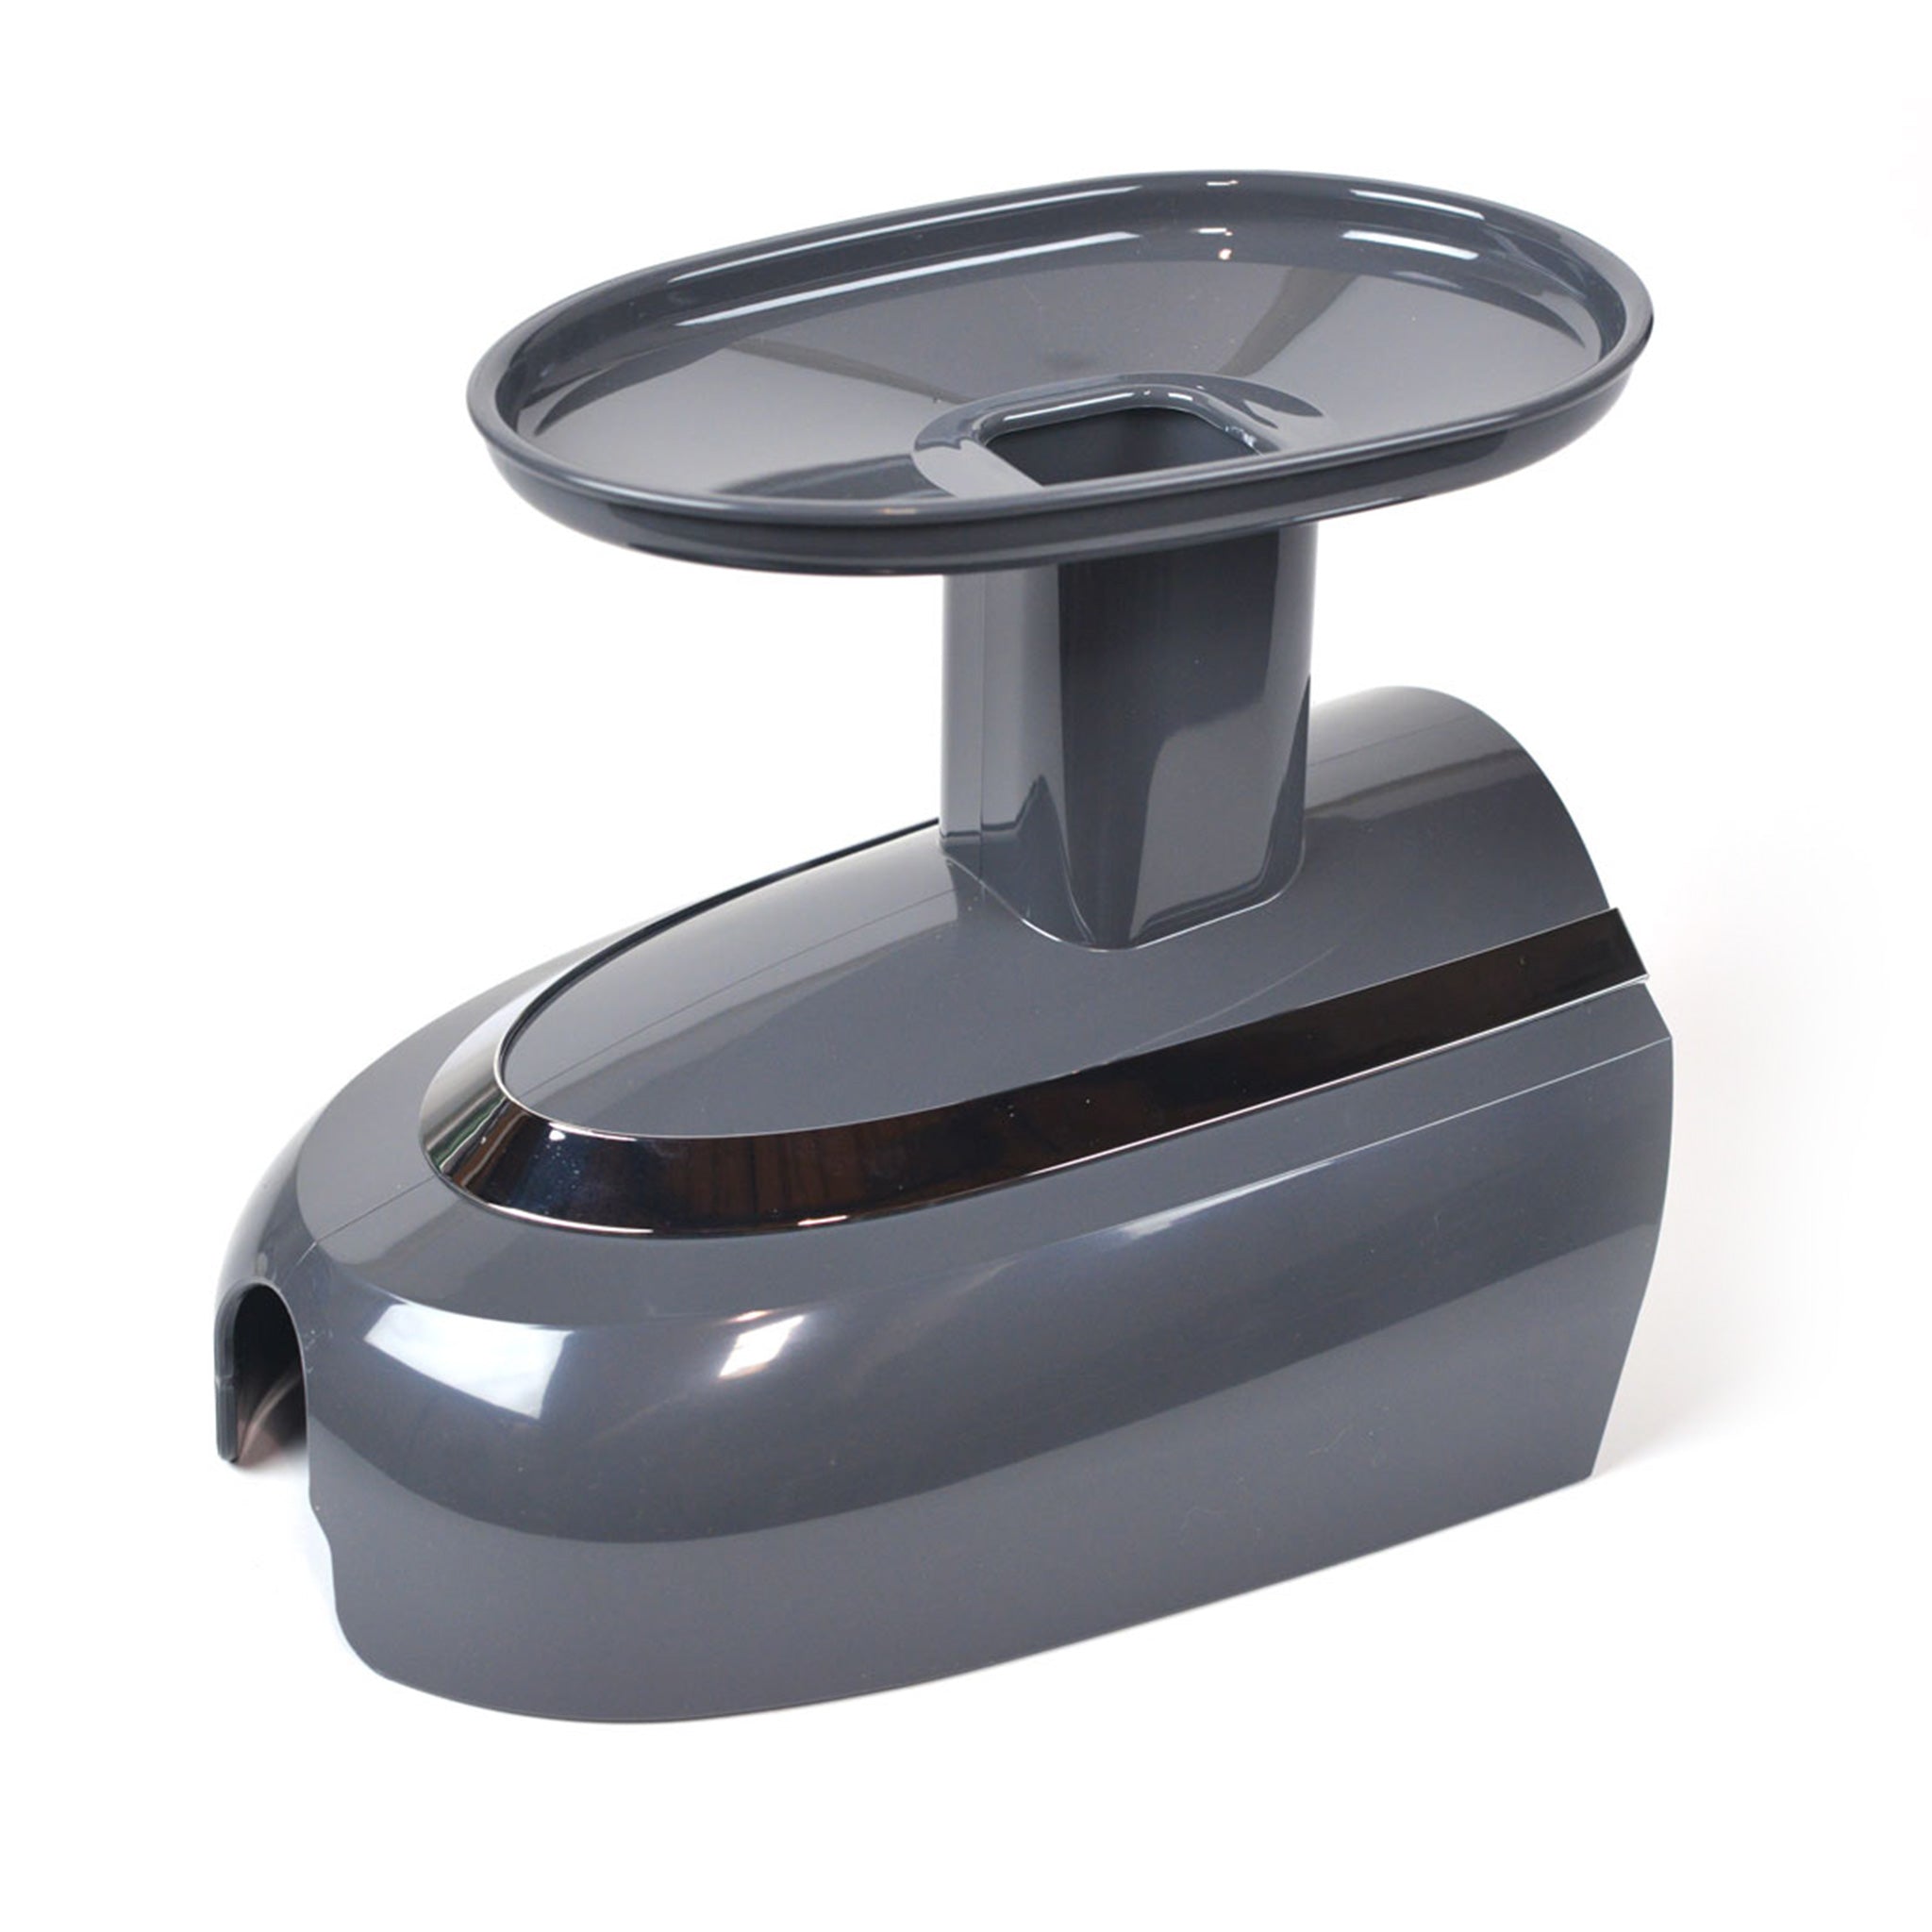 The Gray Safety Hood Assembly is compatible with Greenstar® Pro in Gray (GS-P502).